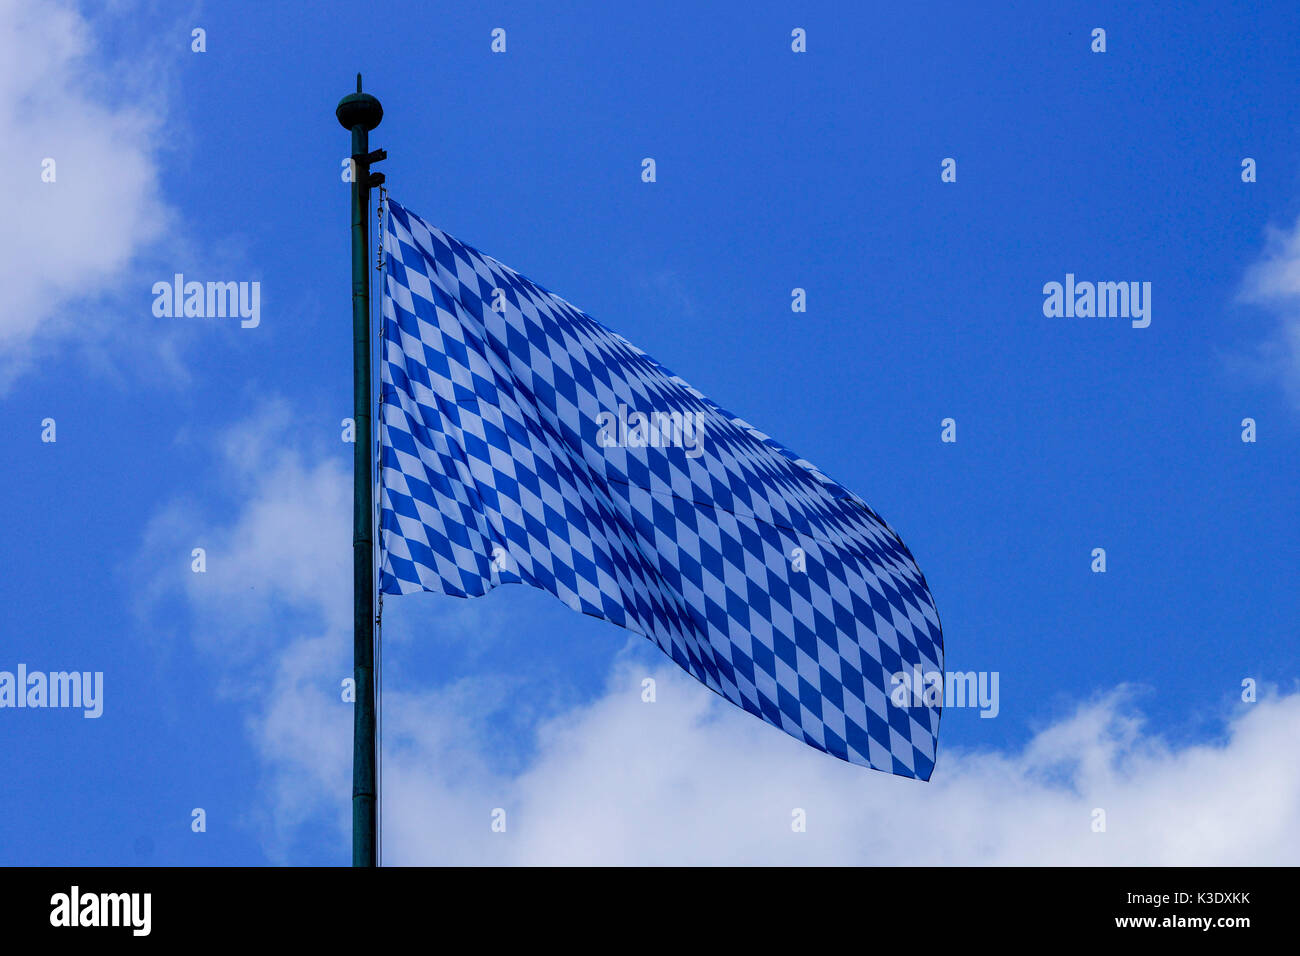 Bavarian flag flutters in the wind, Stock Photo